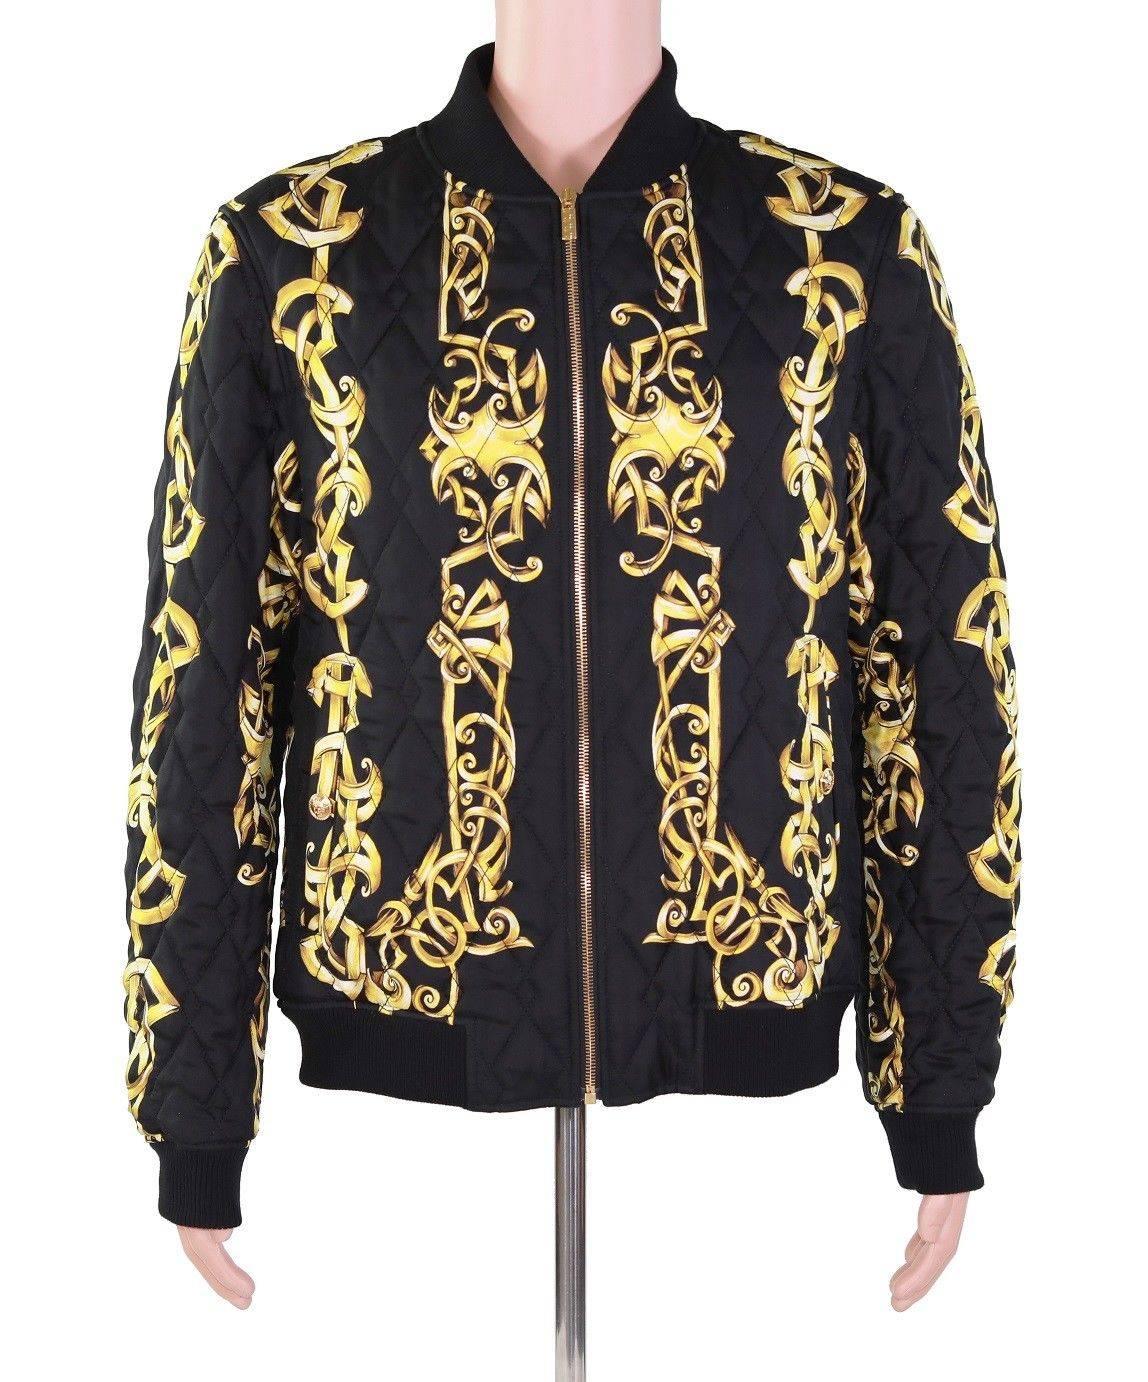 Versace Bomber Jacket

If you were looking for silk shirt that Bruno Mars wore in “Versace on the floor” video then you are in luck! We just received a few Versace silk bomber jackets with the same print!

This bomber jacket from Versace featuring